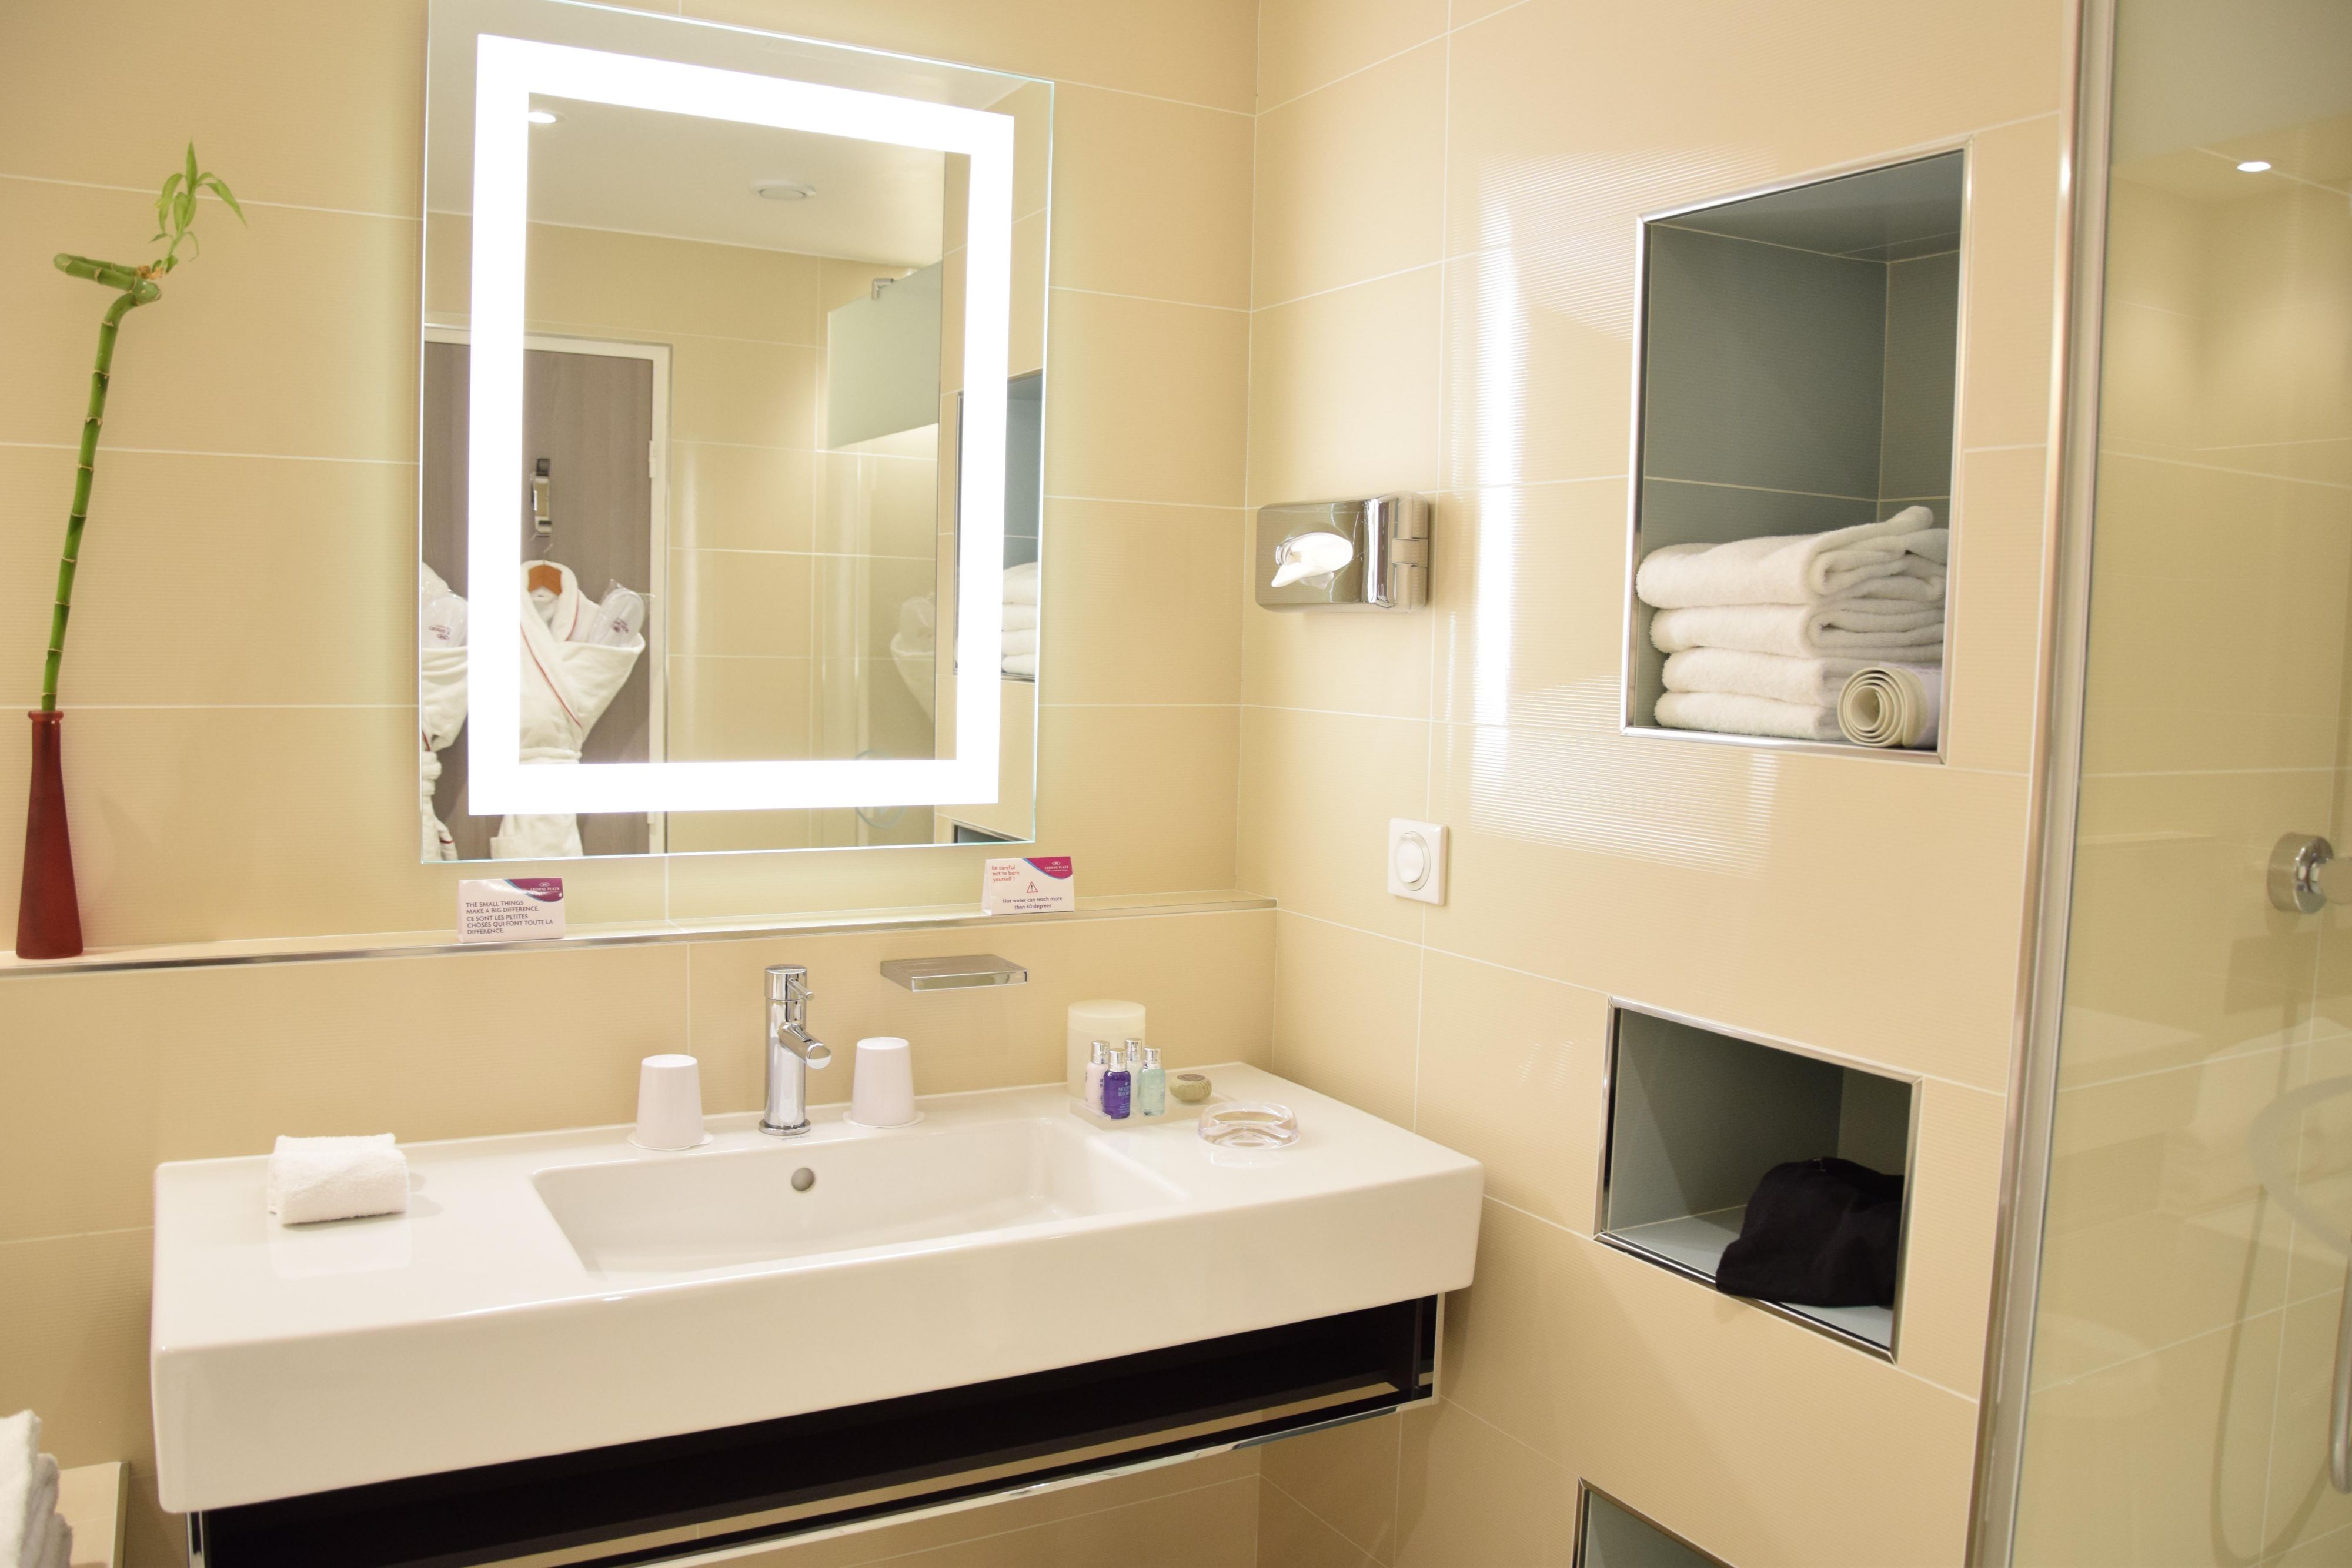 Bathroom fully equiped with welcome amenities